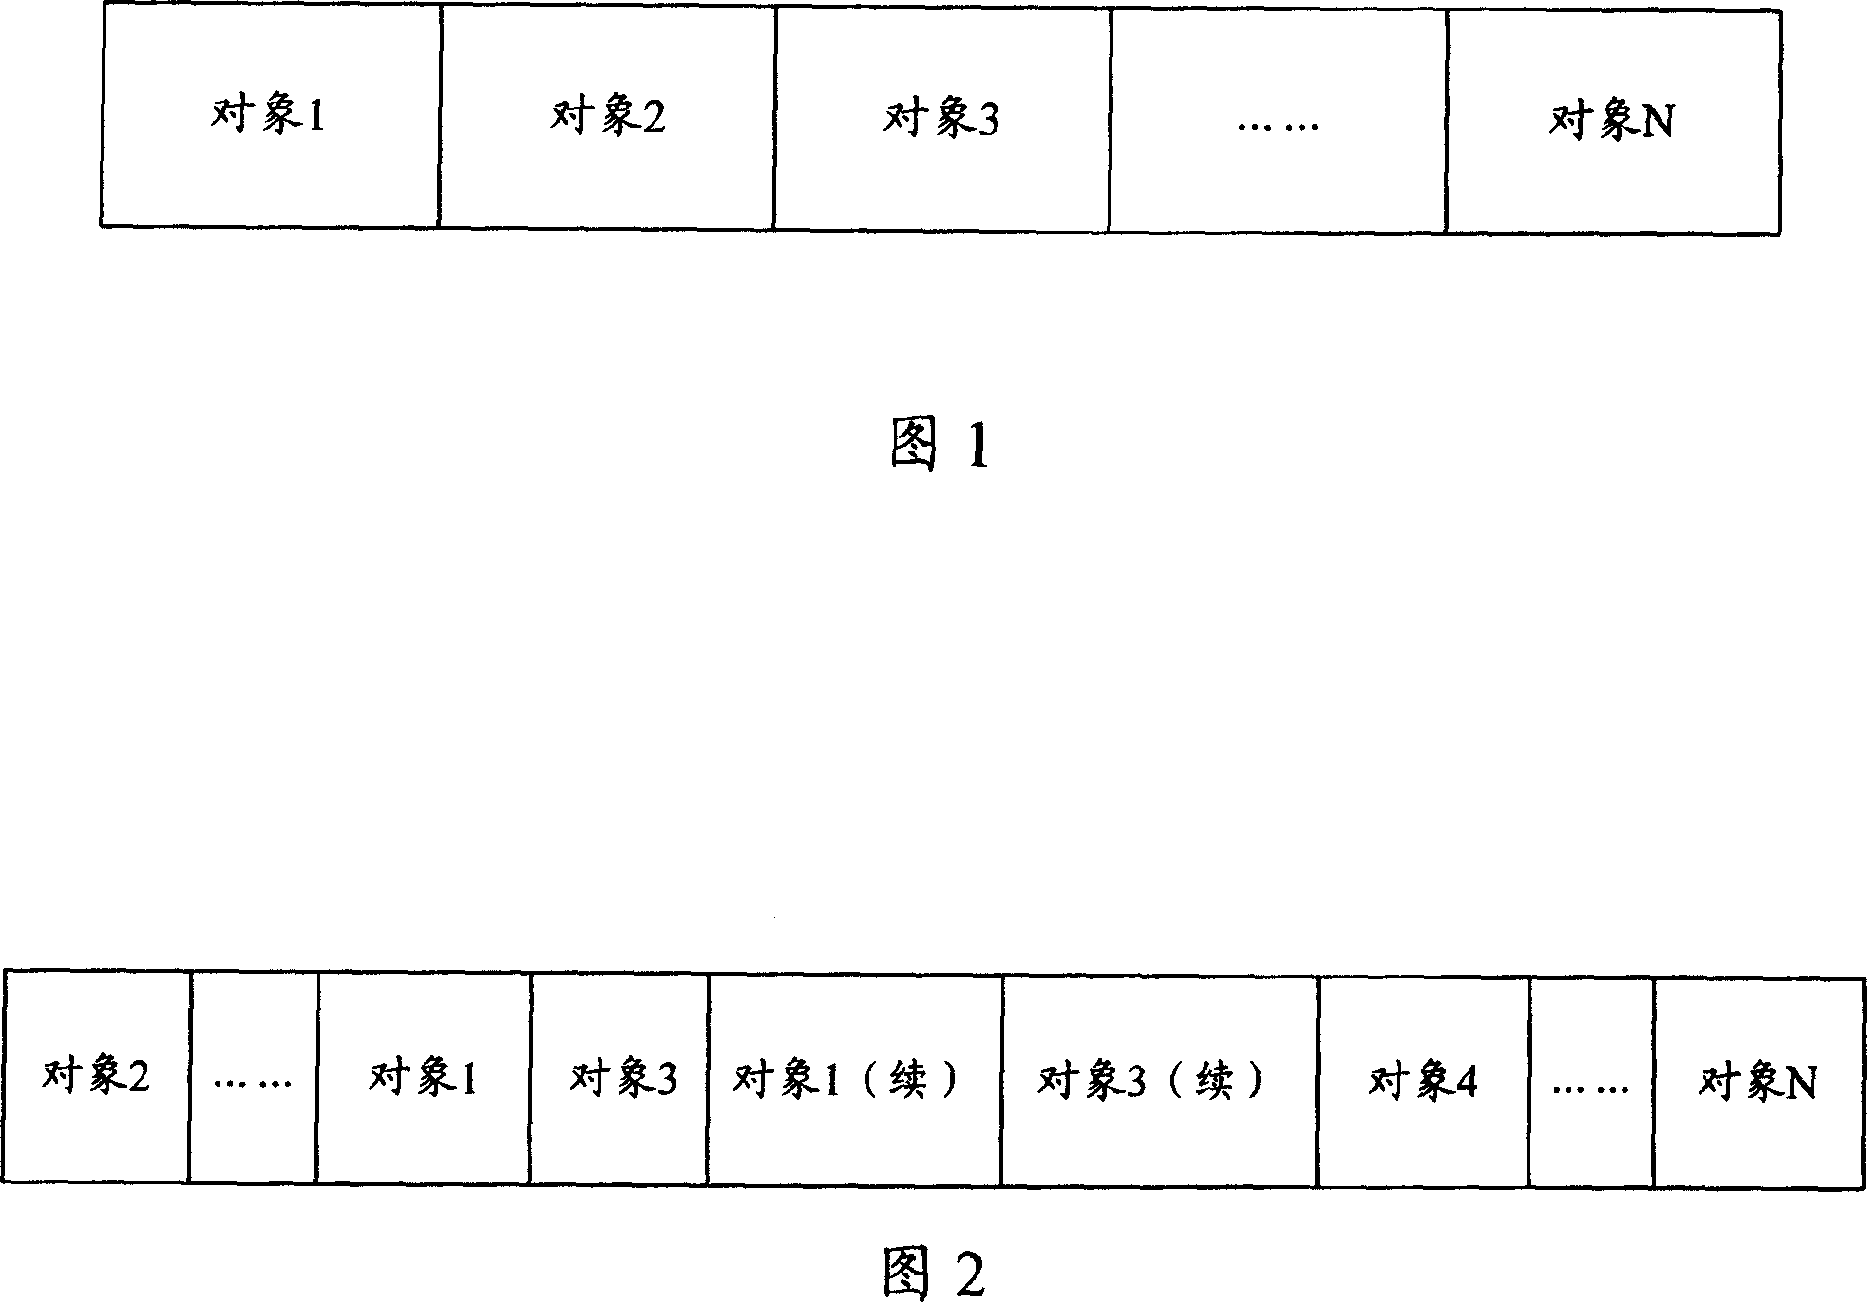 Document storing method and system